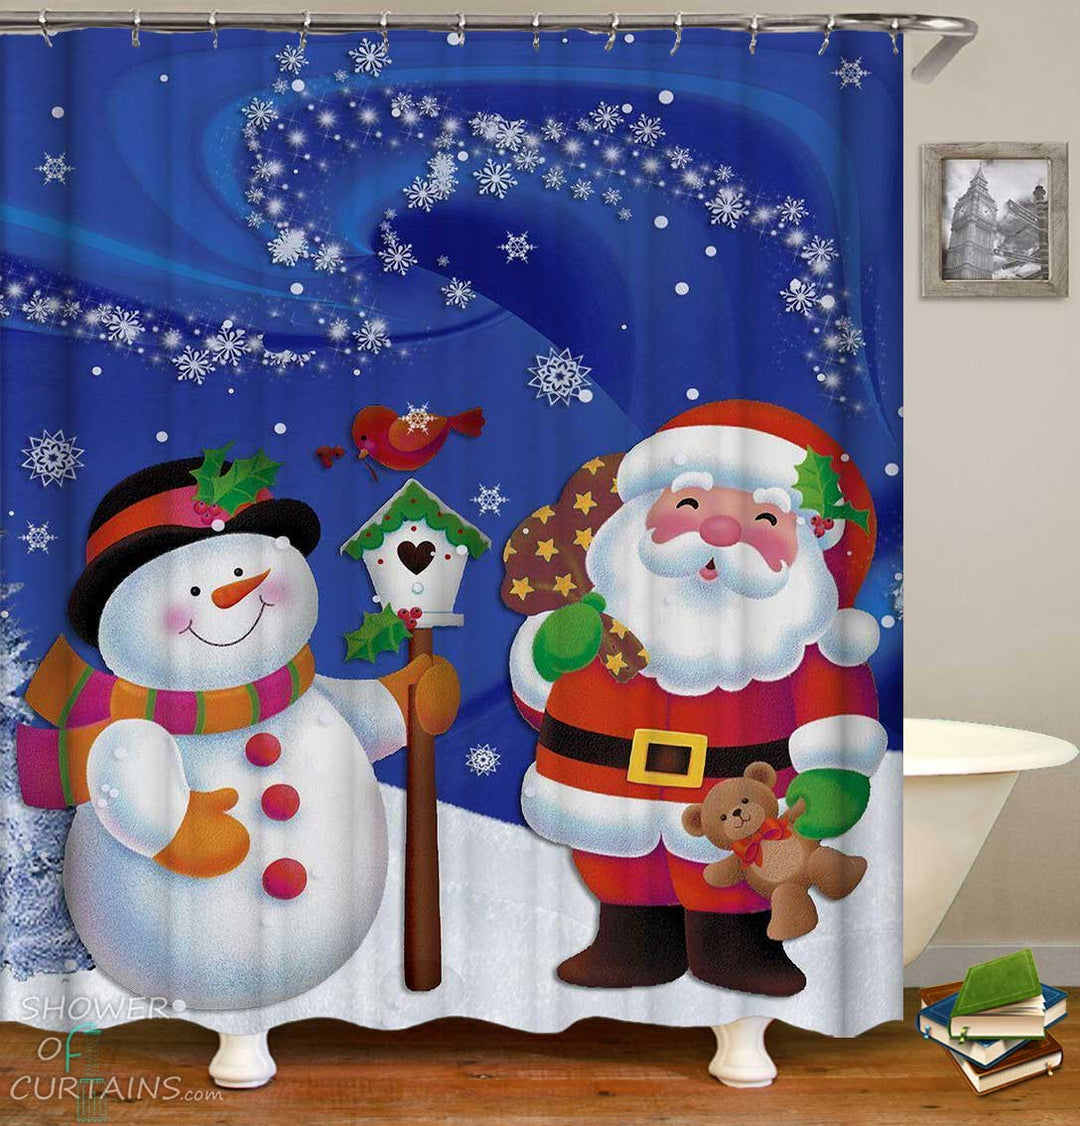 Shower Curtains with Santa Claus and Snowman